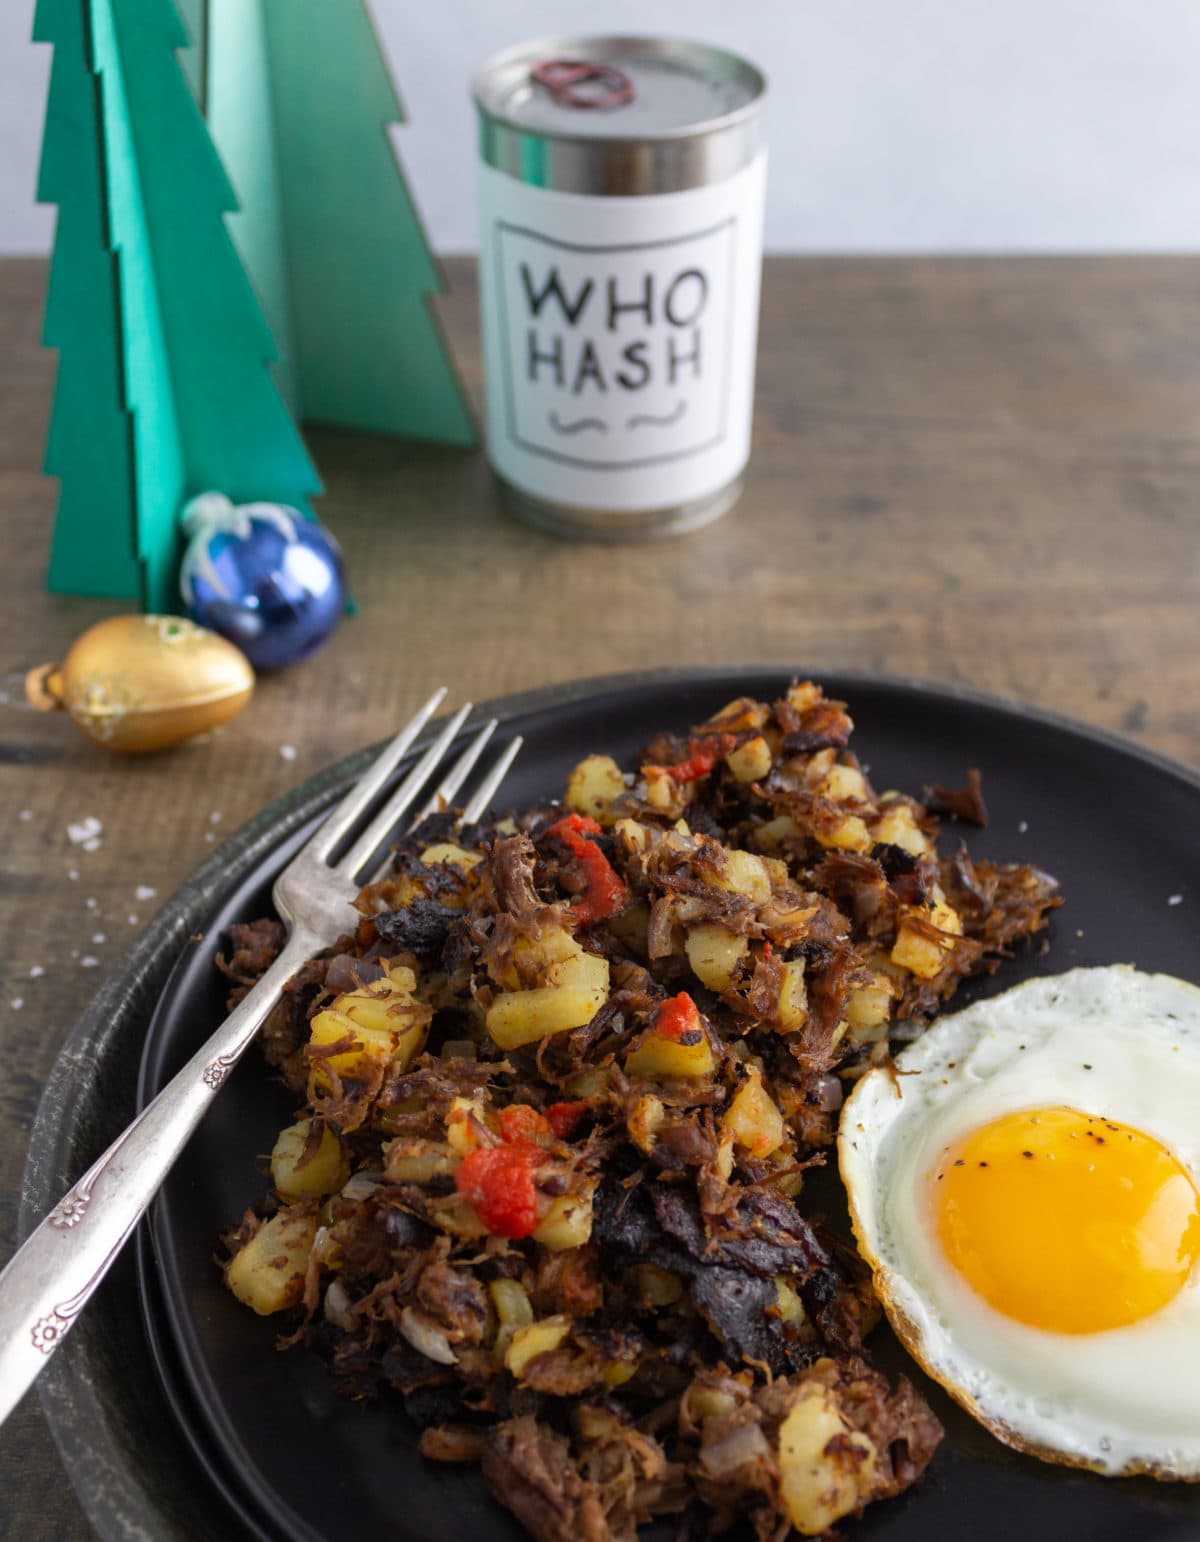 Hash and egg near Christmas decorations